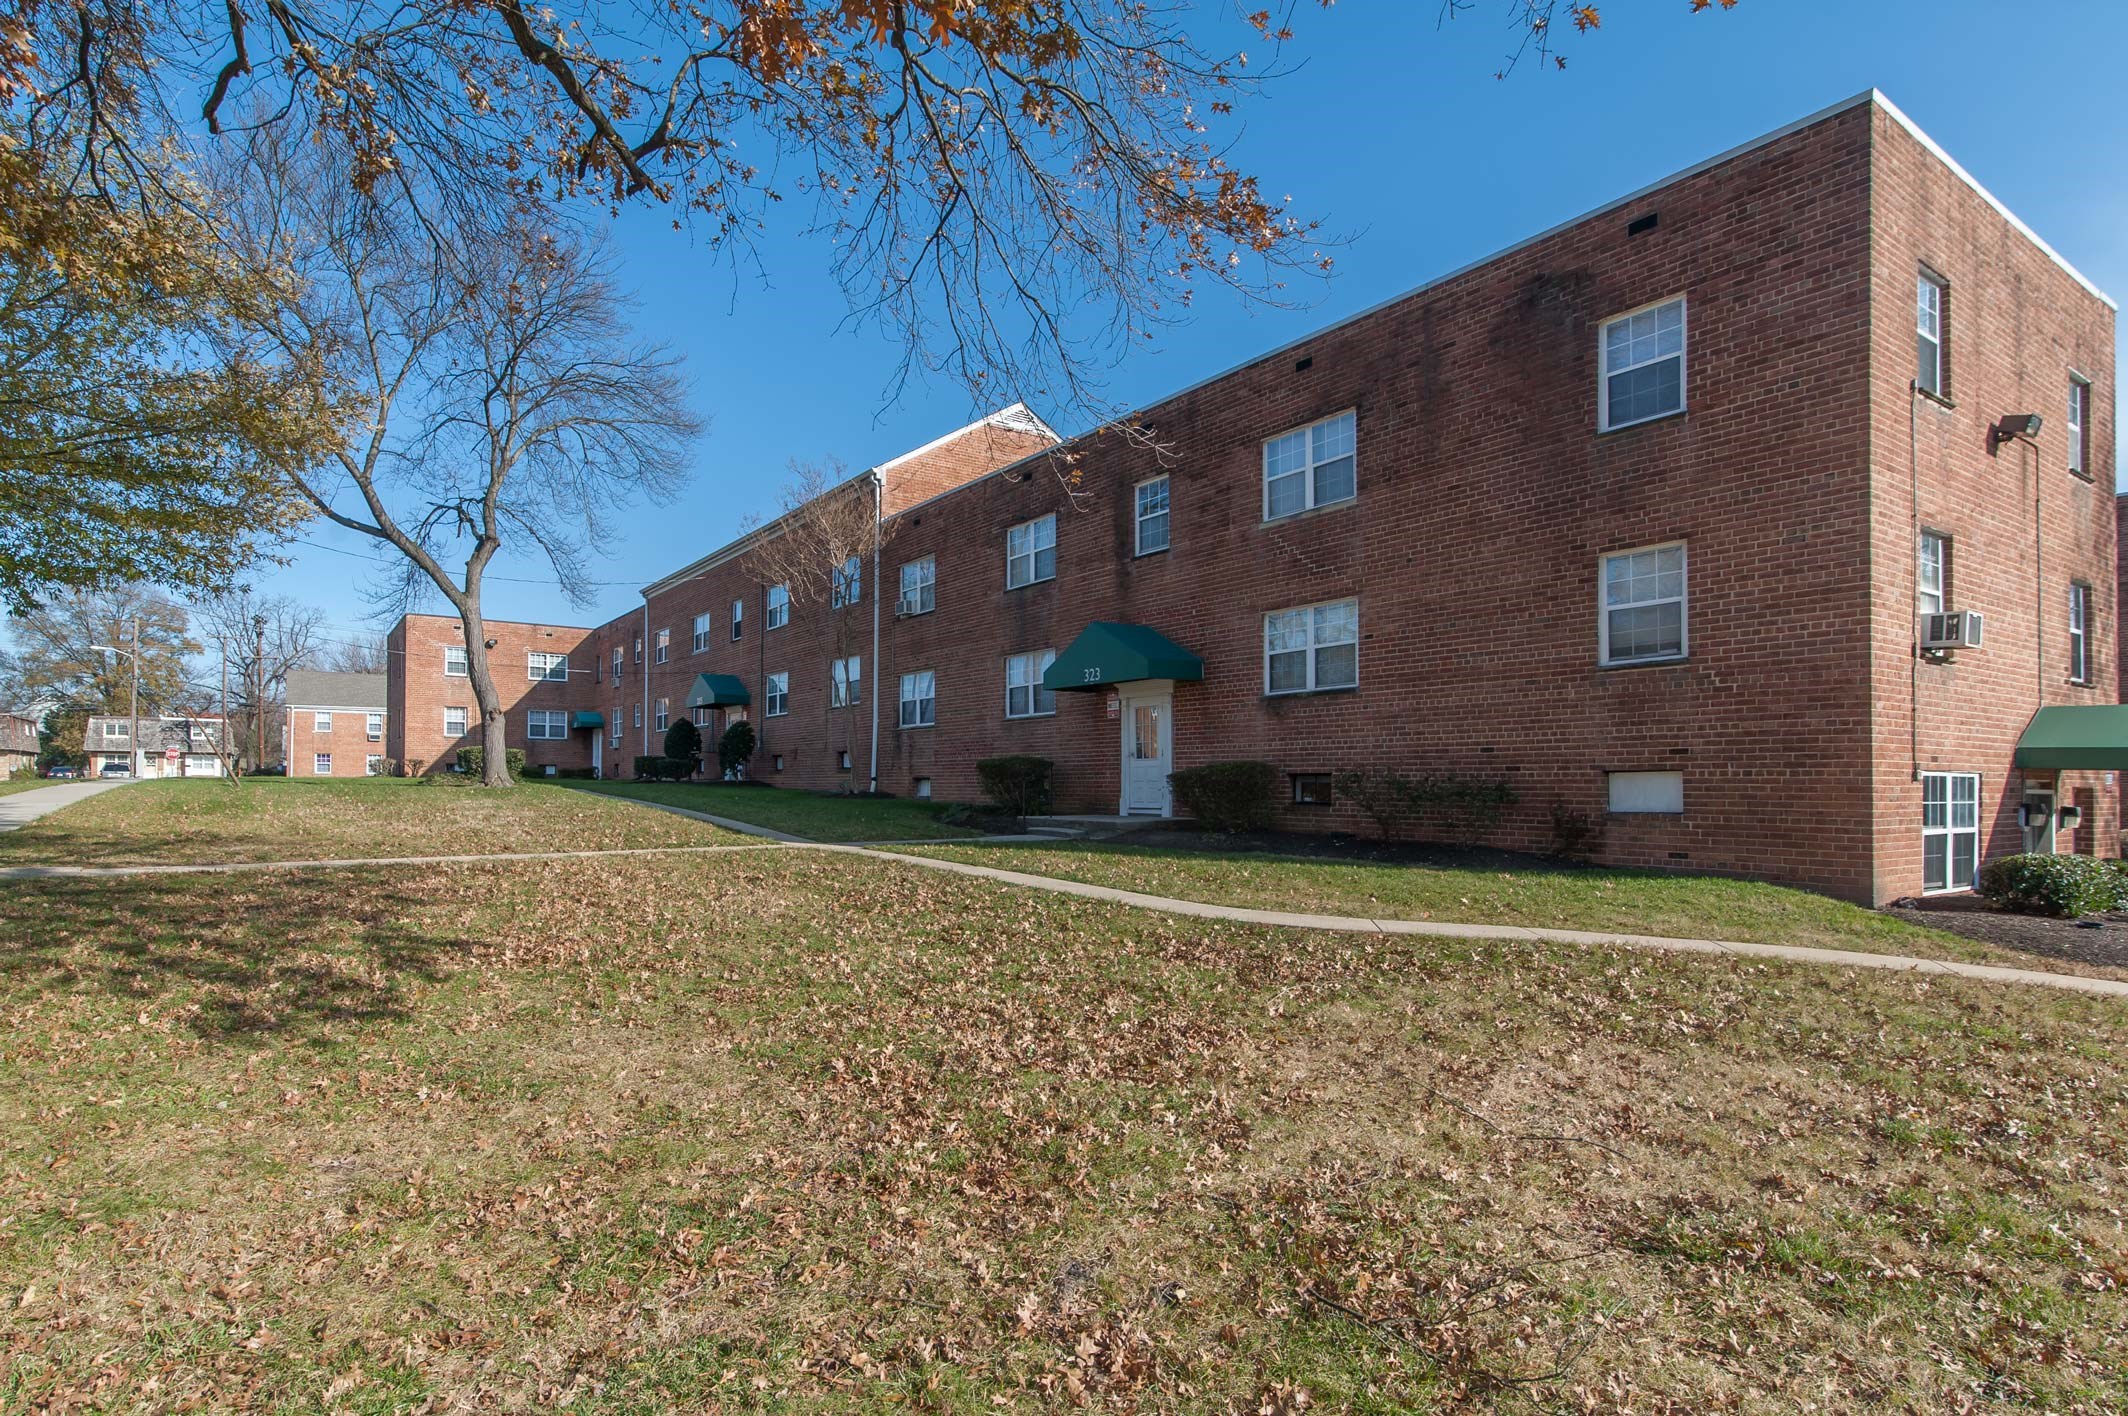 Photos and Video of Laurel Court Apartments in Laurel MD